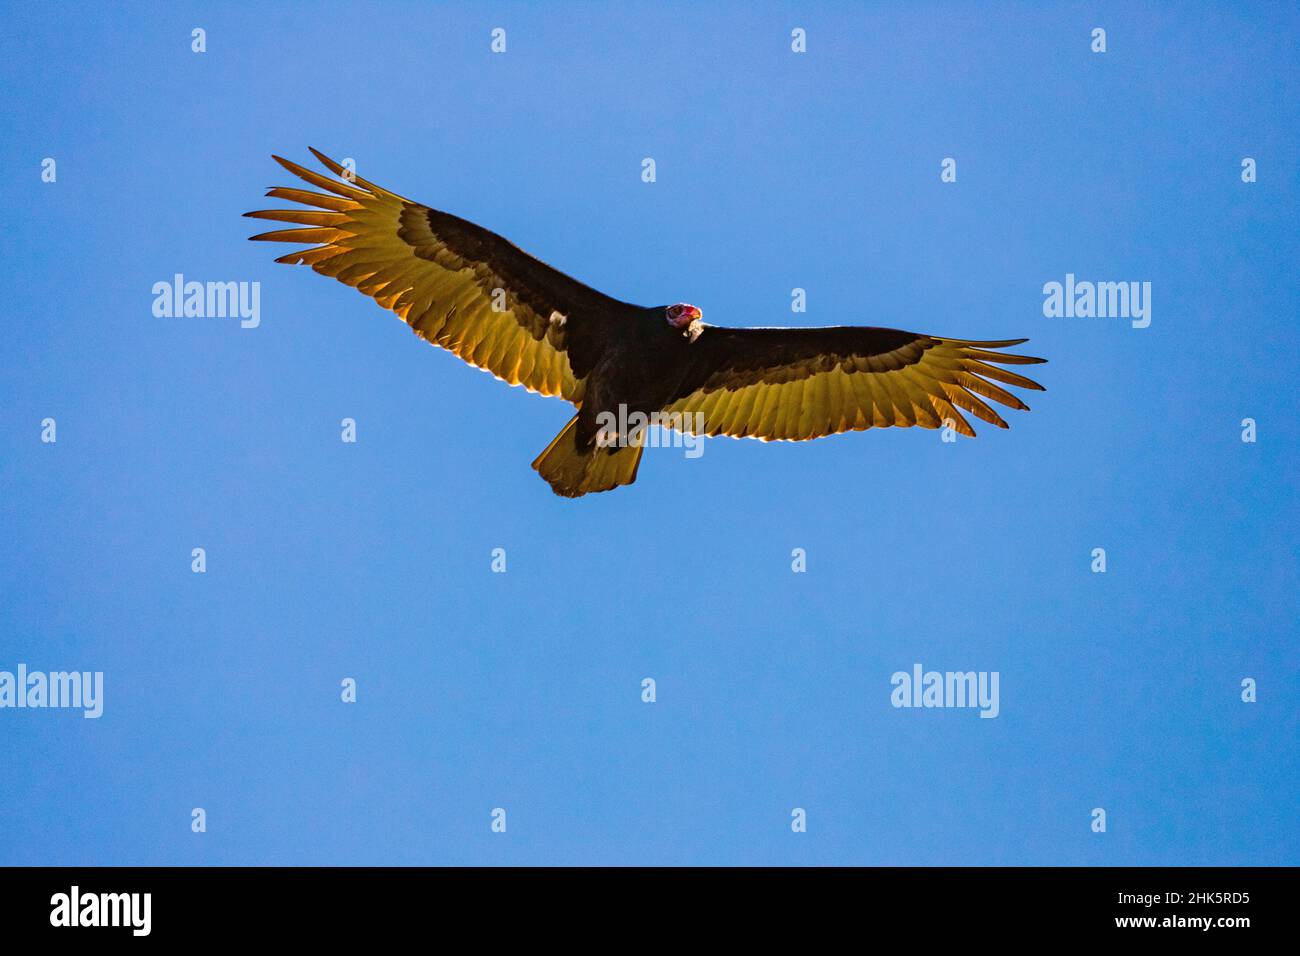 Turkey Vulture (Cathartes aura)  souring against a clear blue sky.  Photographed in Shasta County, California, USA. Stock Photo